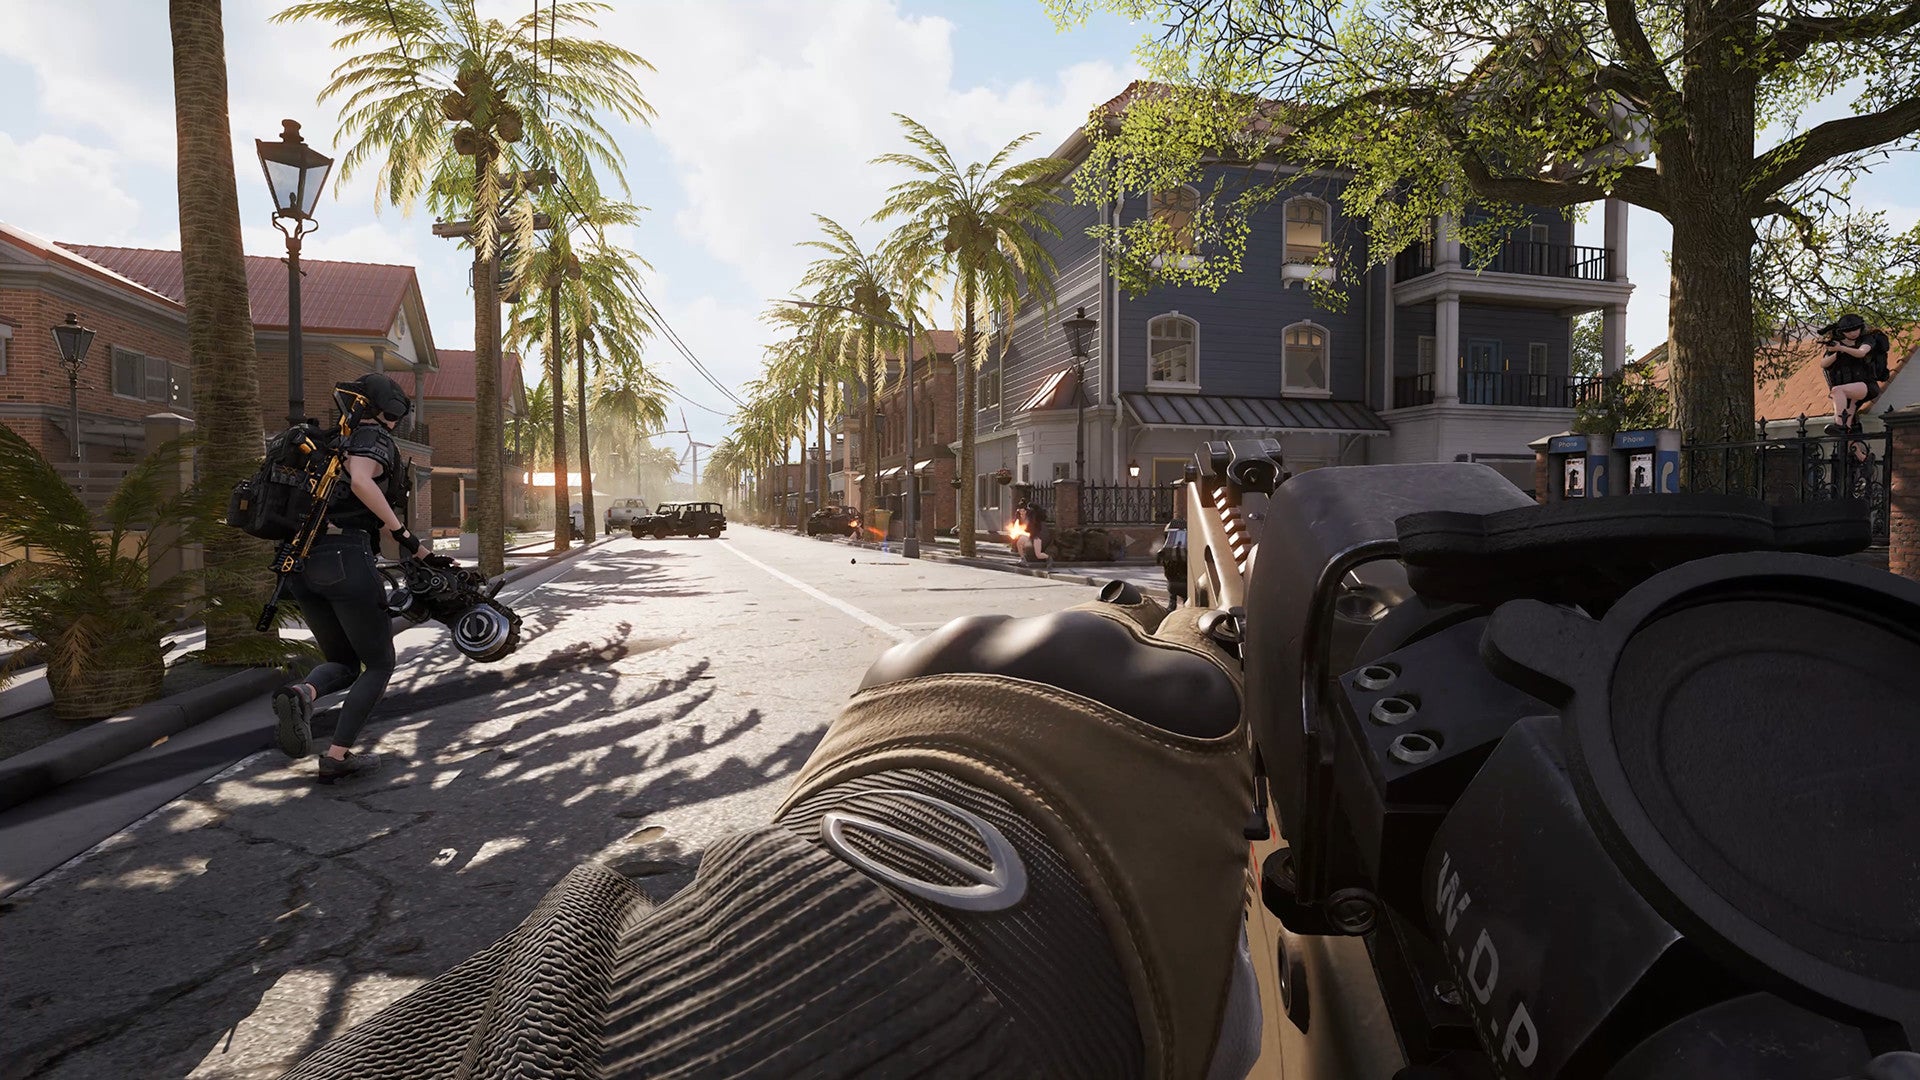 A screenshot of Super People showing a massive, screen-filling gun held in a sunny street lined by palmed trees.